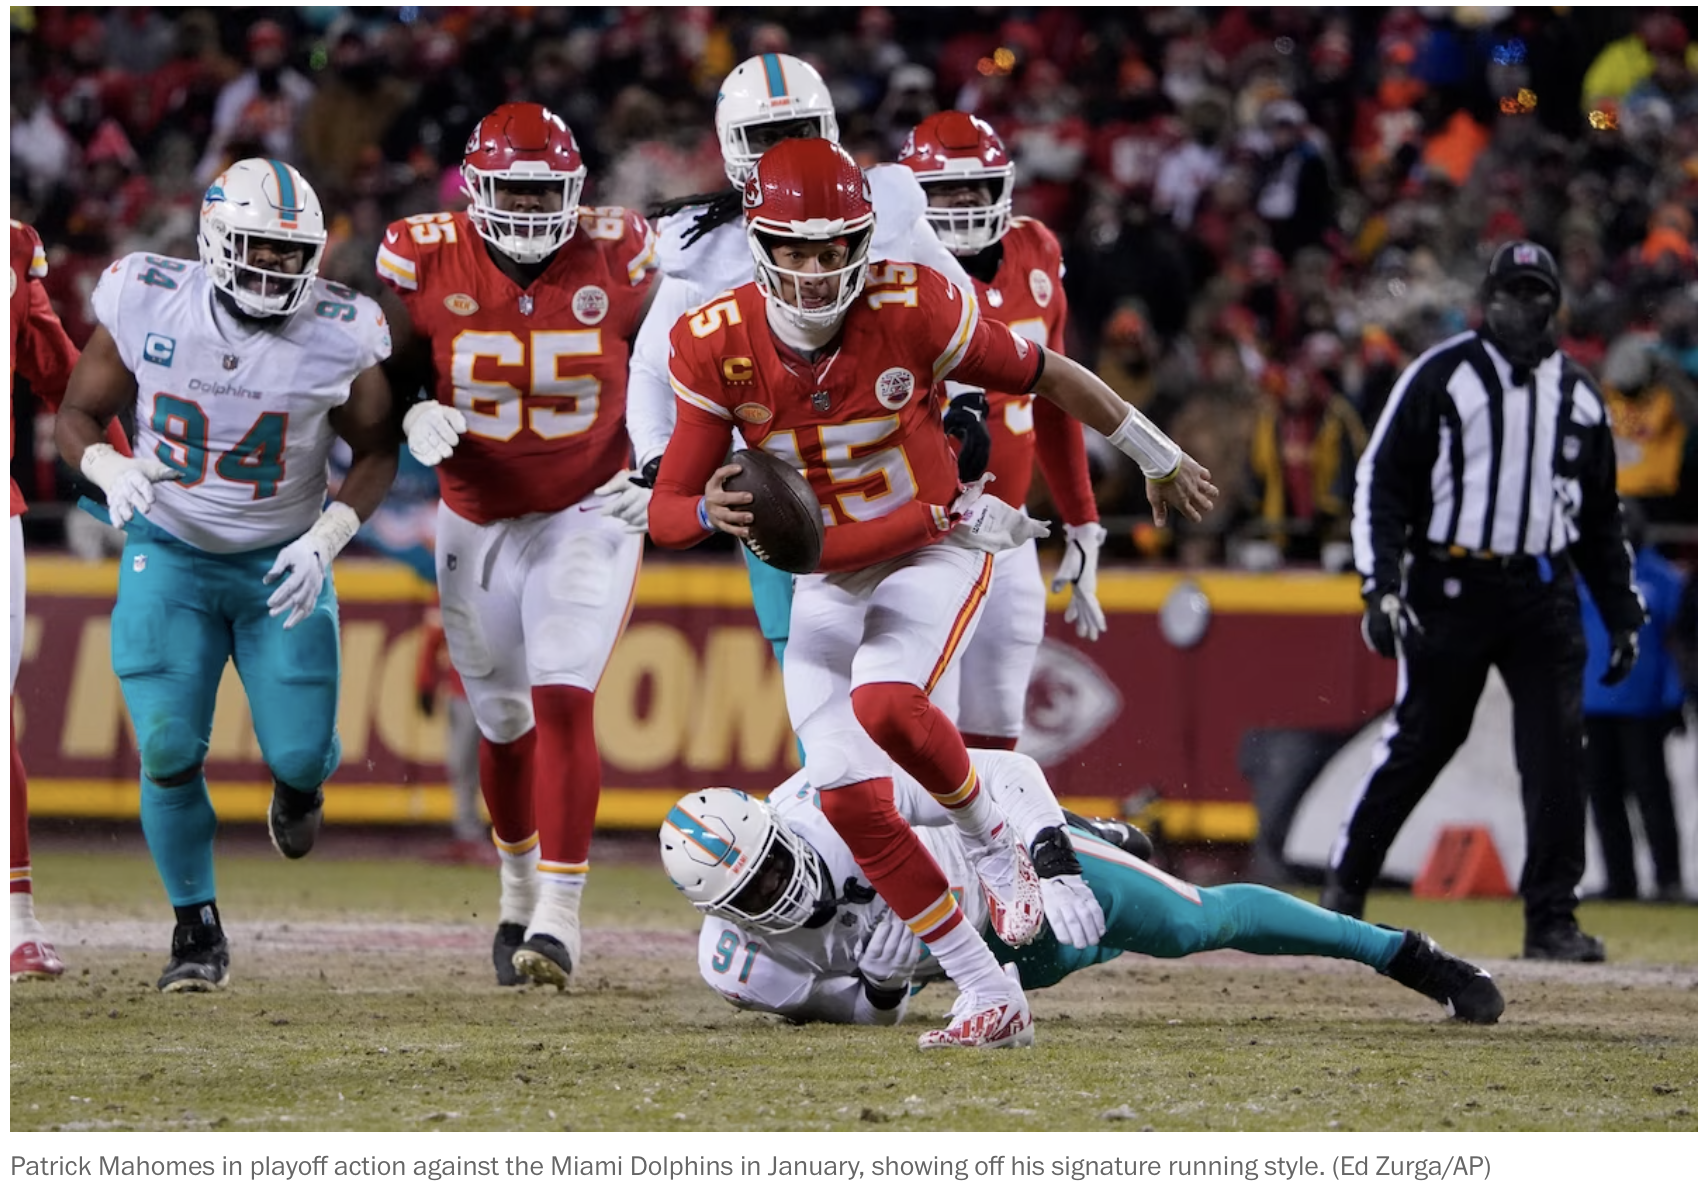 Patrick Mahomes in playoff action against the Miami Dolphins in January, showing off his signature running style. (Ed Zurga/AP)